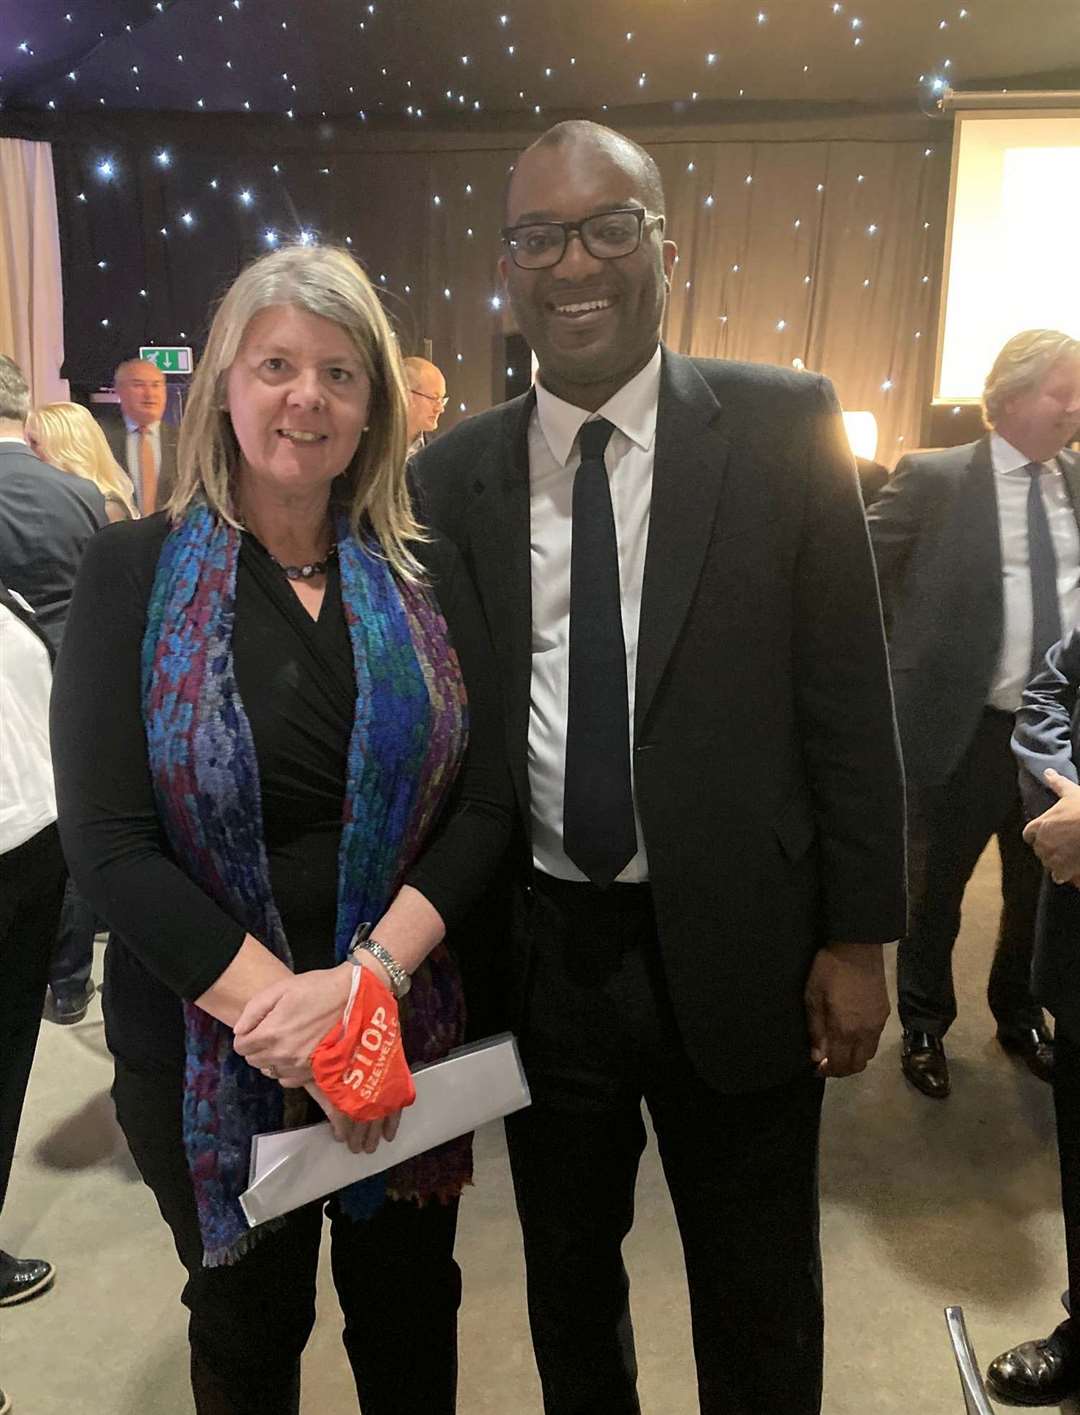 Alison Downes, executive director of the Stop Sizewell campaign, with Kwasi Kwarteng, previously Secretary of State for Business, Energy and Industrial Strategy, taken in November 2021. Picture submitted